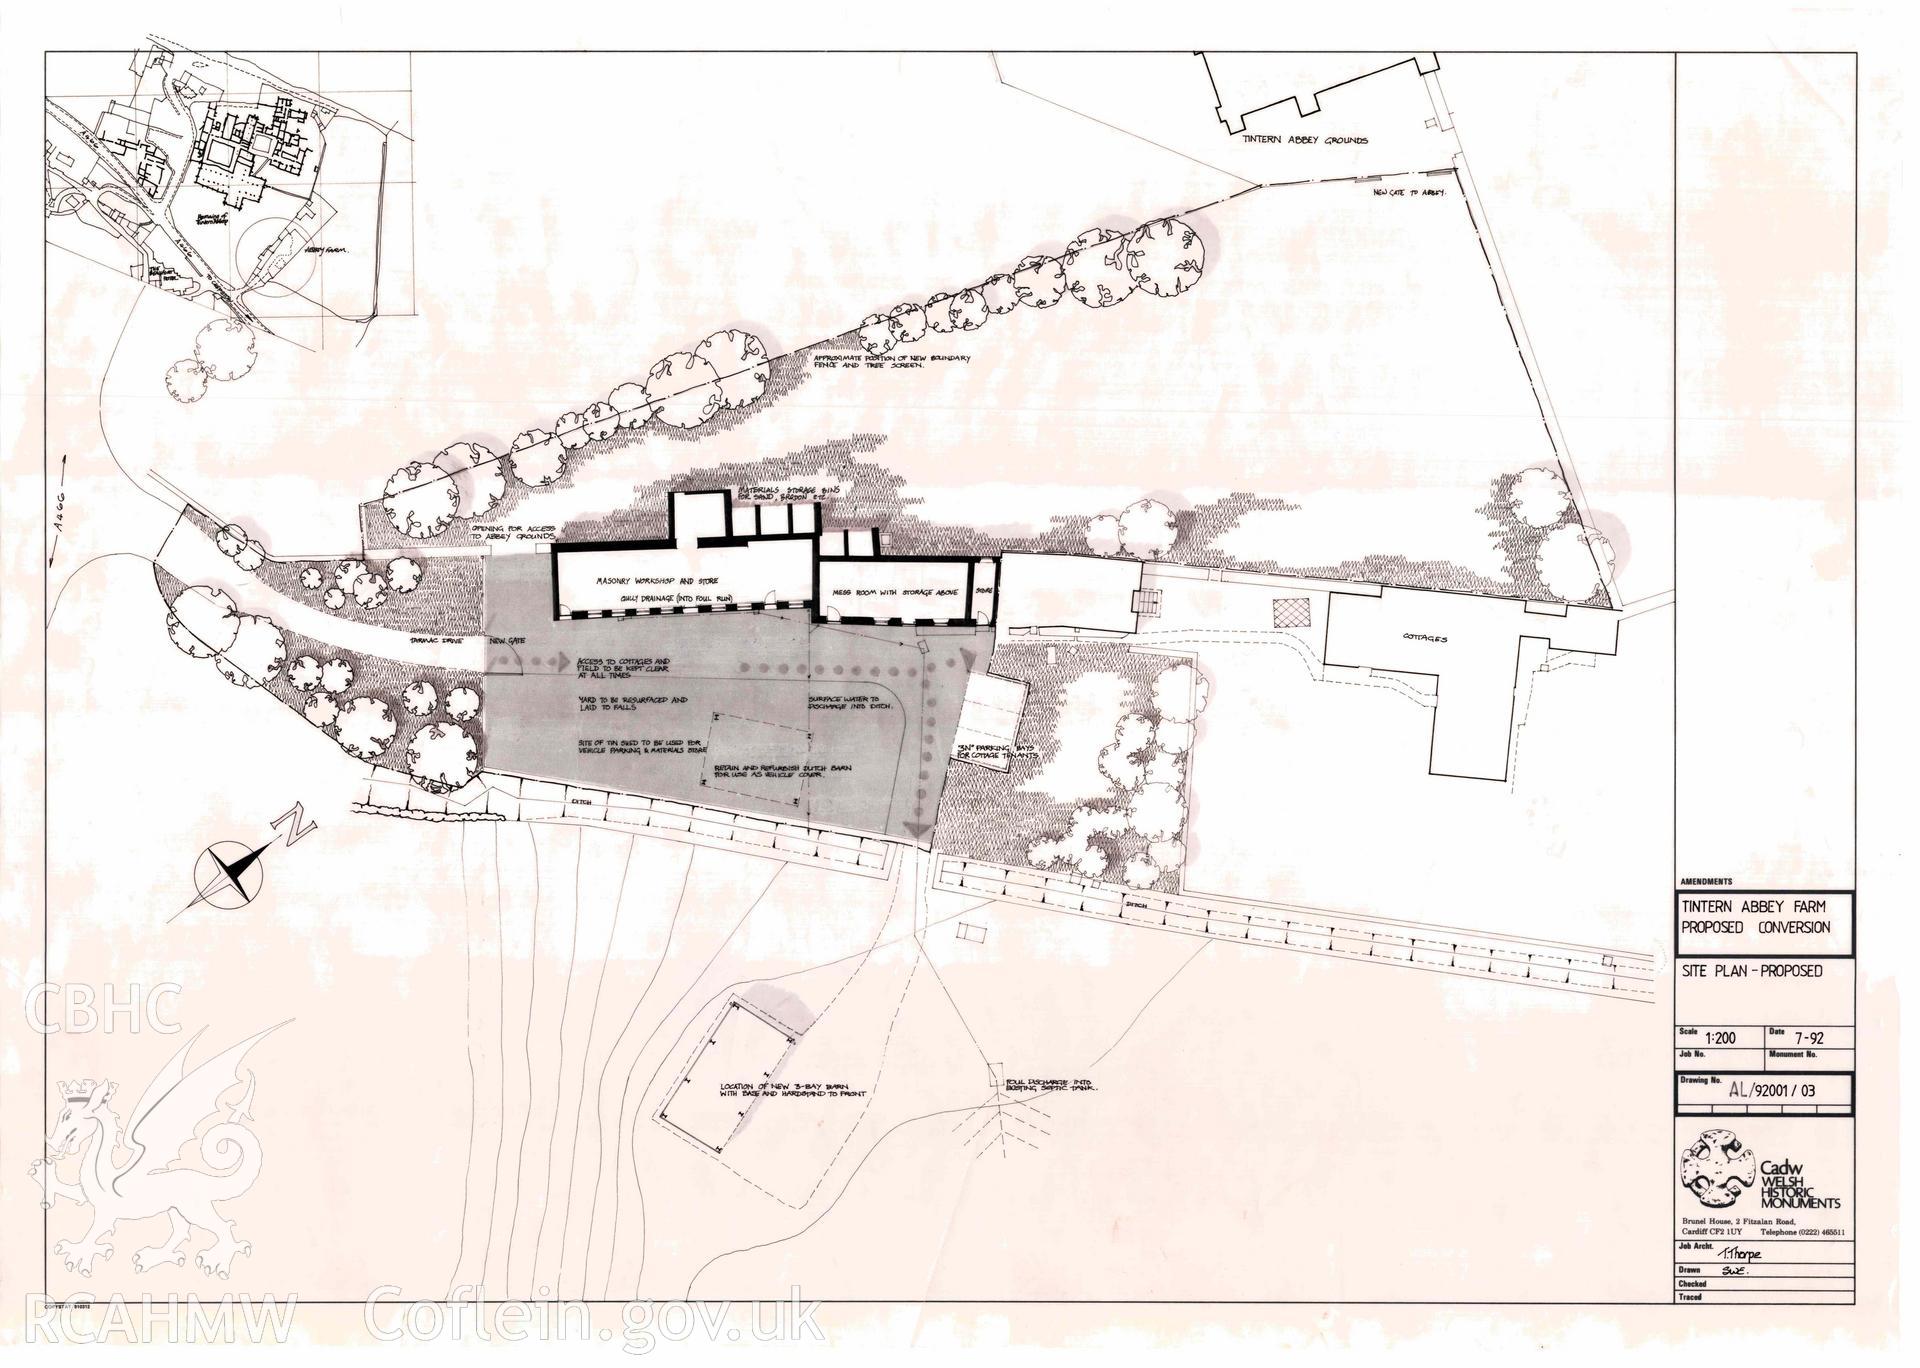 Cadw guardianship monument drawing, site plan proposed of Tintern Abbey Farm, proposed conversion, Tintern Abbey. Dated July 1992.